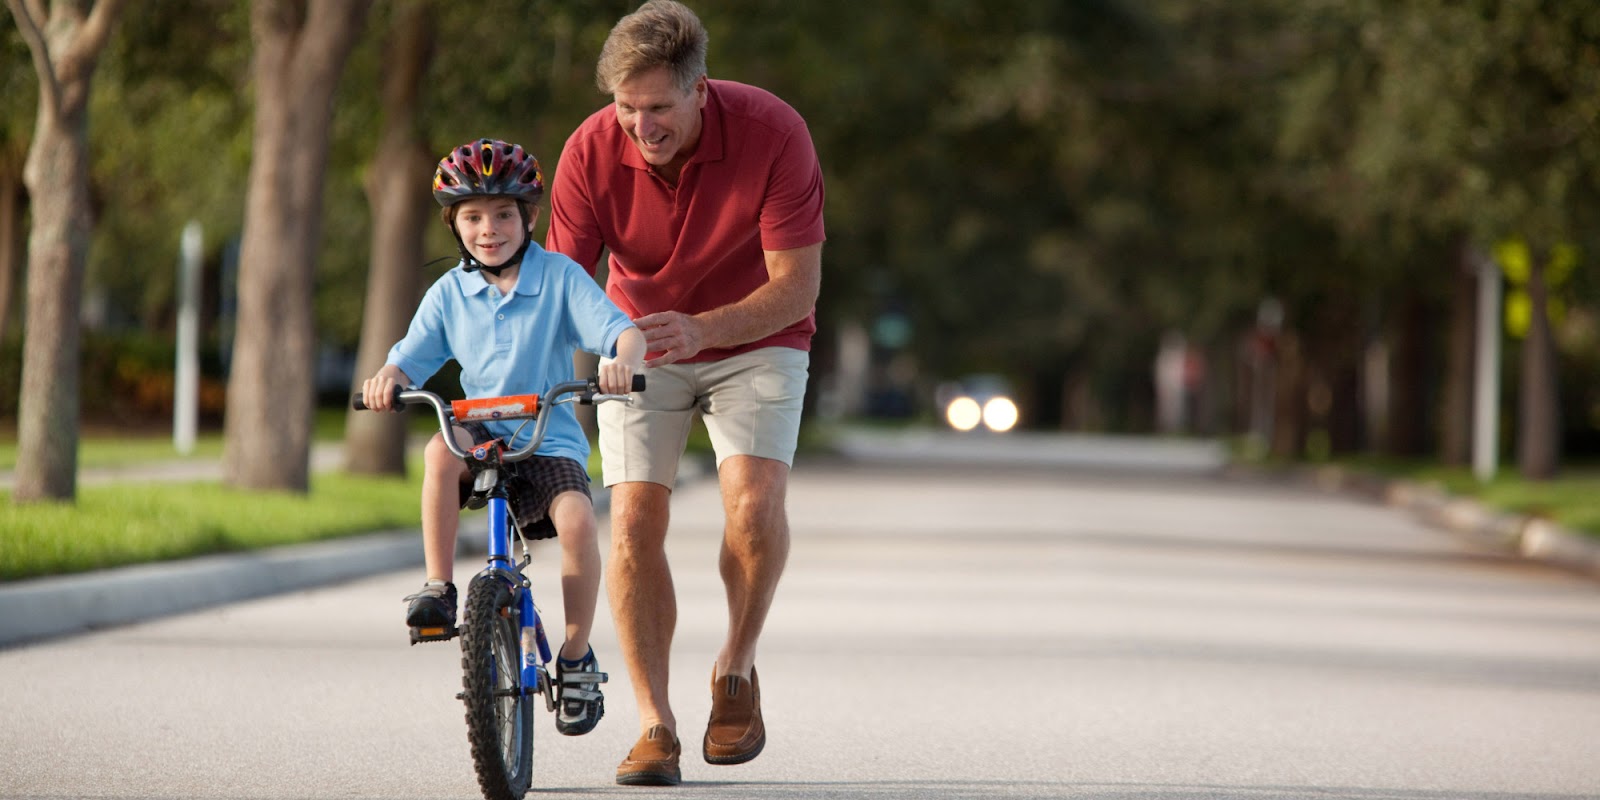 How to Teach a Child to Ride a Bike